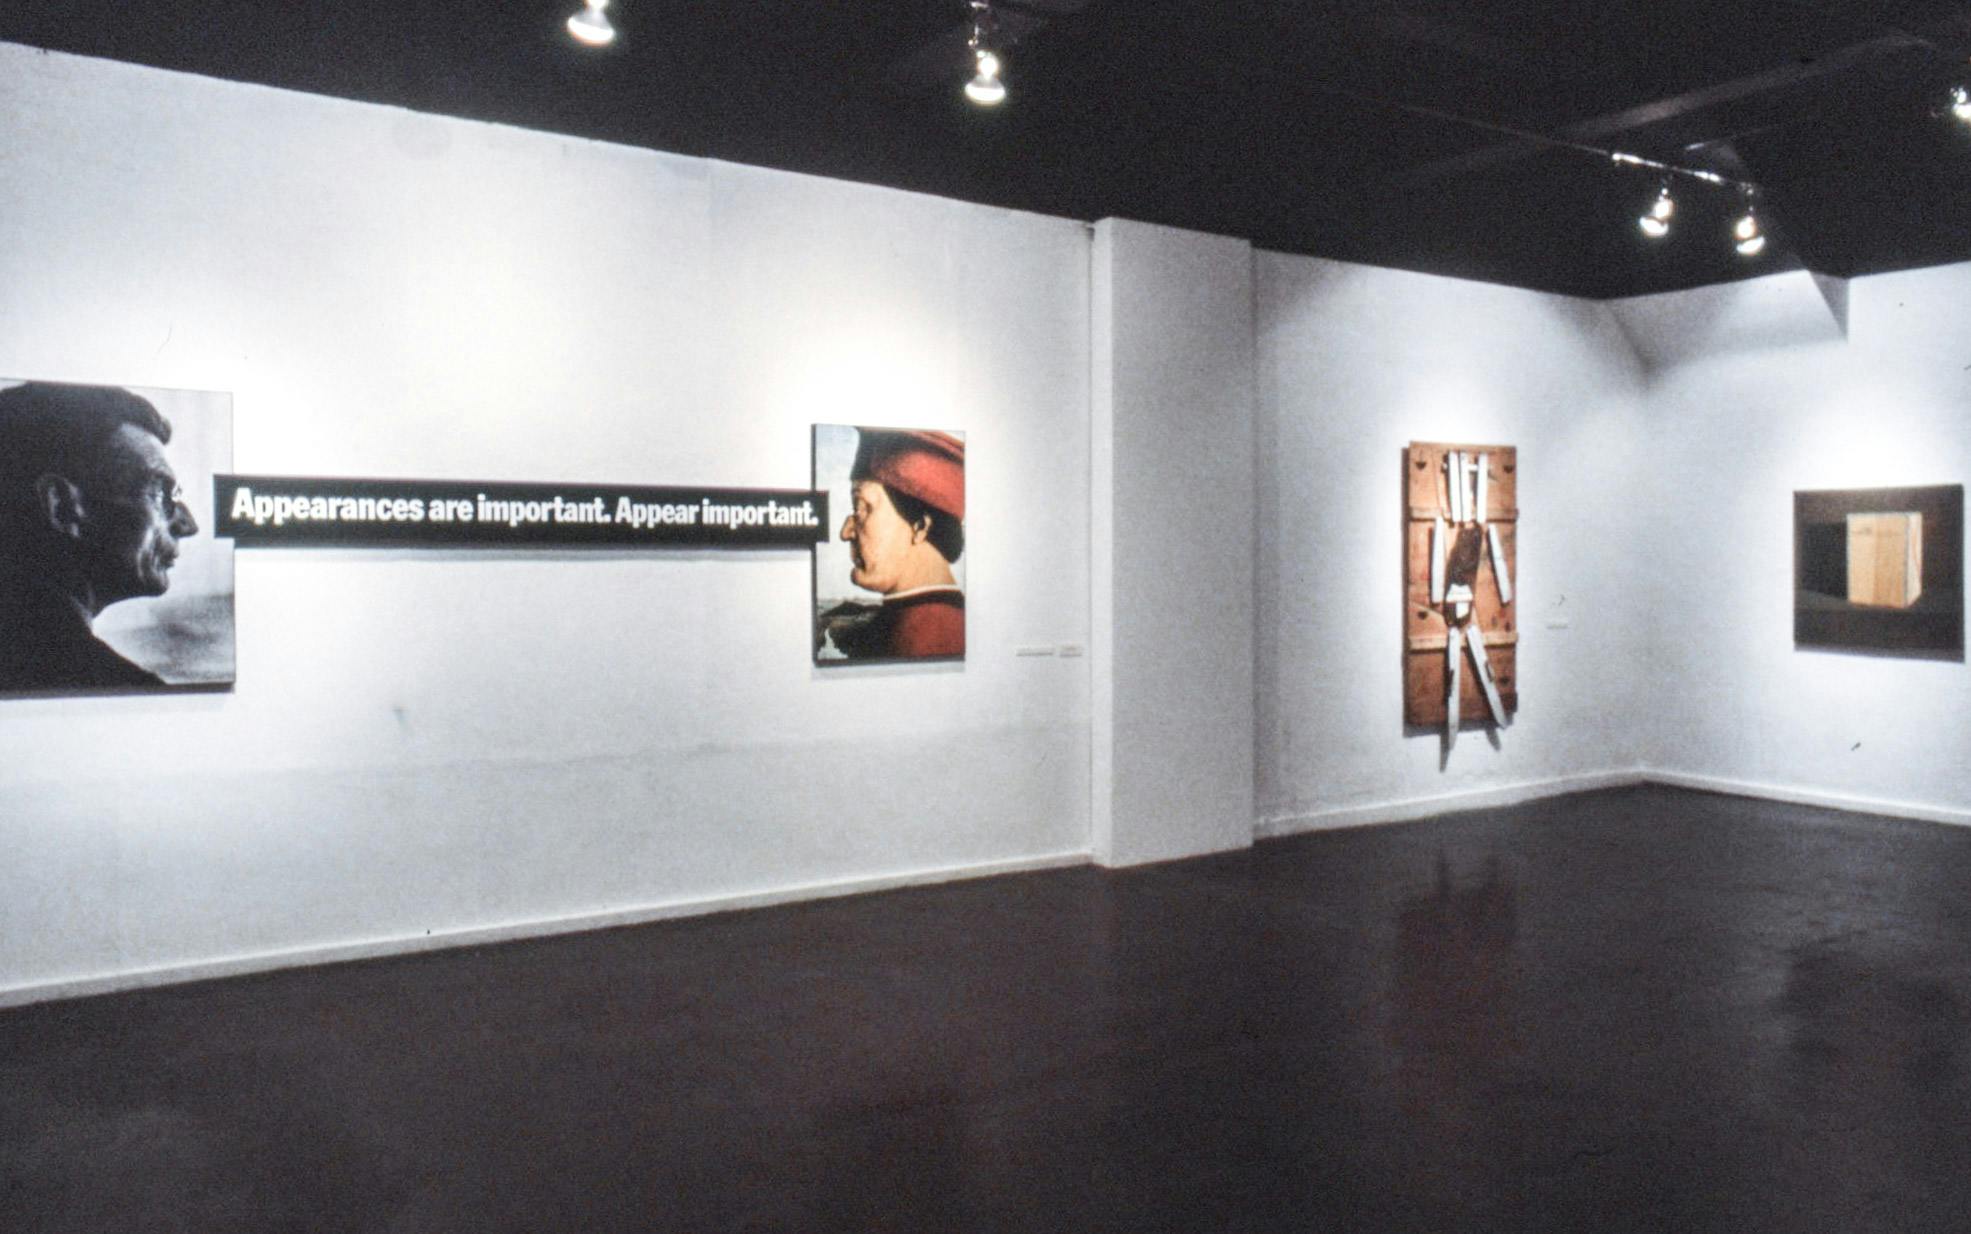 3 artworks in a gallery. One work is made of 2 portraits facing each other, and text between them reads "Appearances are important. Appear important." The other 2 works are a sculpture and a painting. 